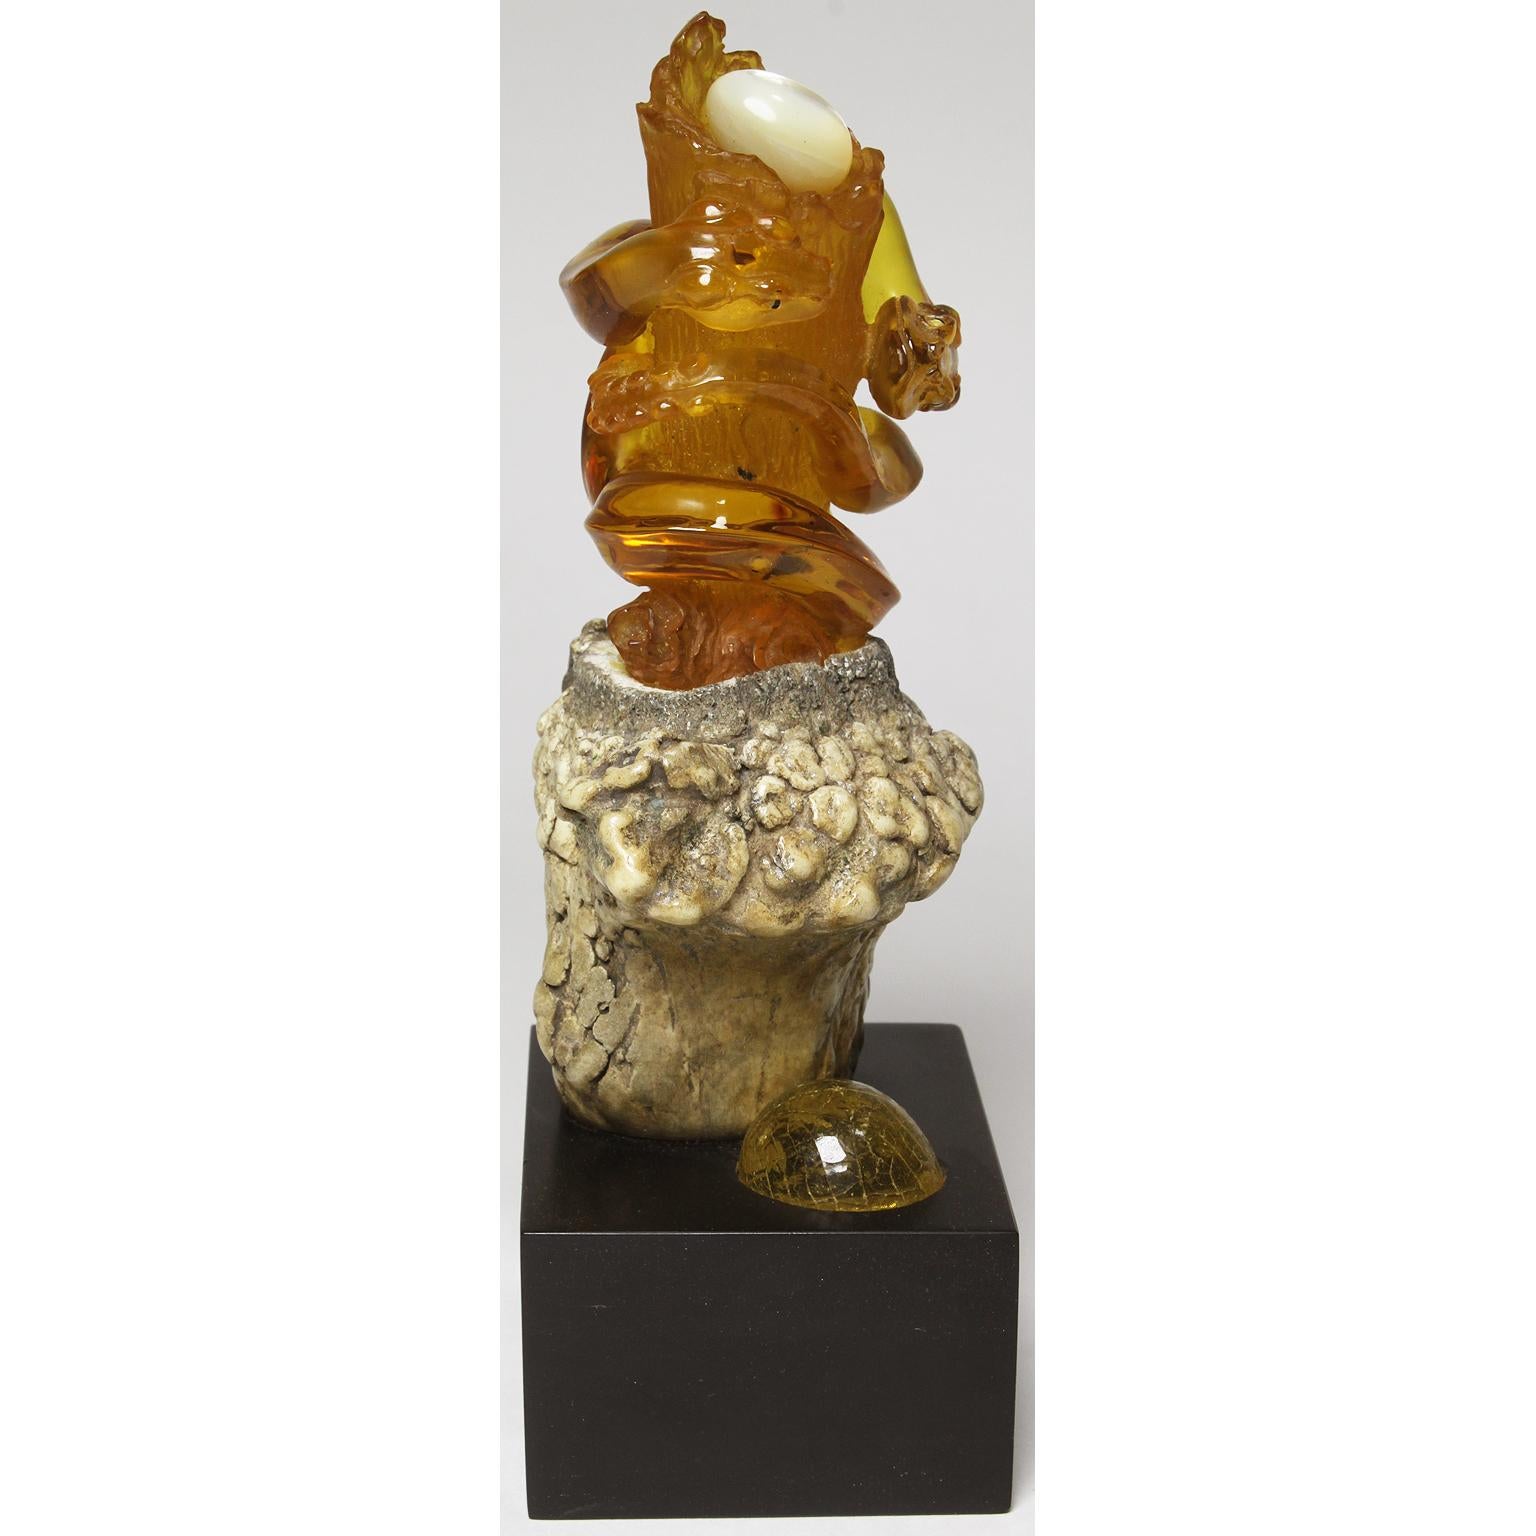 A finely carved natural Aber Specimen group of nesting snakes, featuring a large, very clear amber specimen from Chiapas, Mexico, a carving representing two snakes intertwined around a tree trunk rests within a section of natural moose antler which